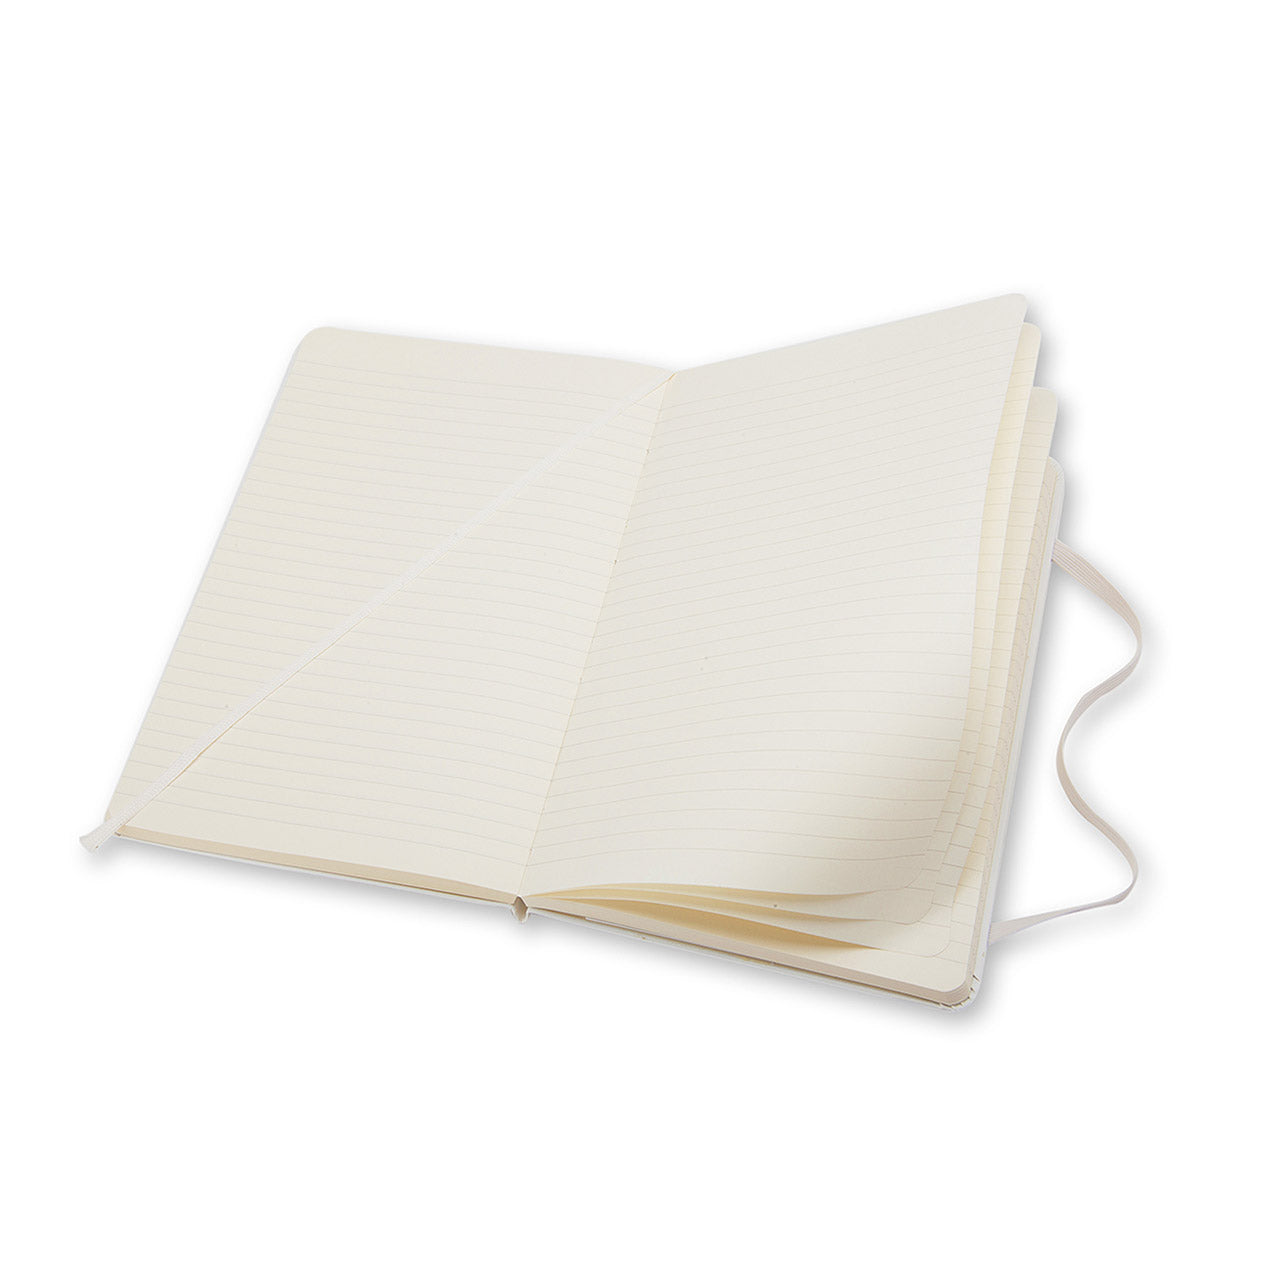 Classic Large Hard Cover Notebook 2 for 1 Value Pack Ruled White